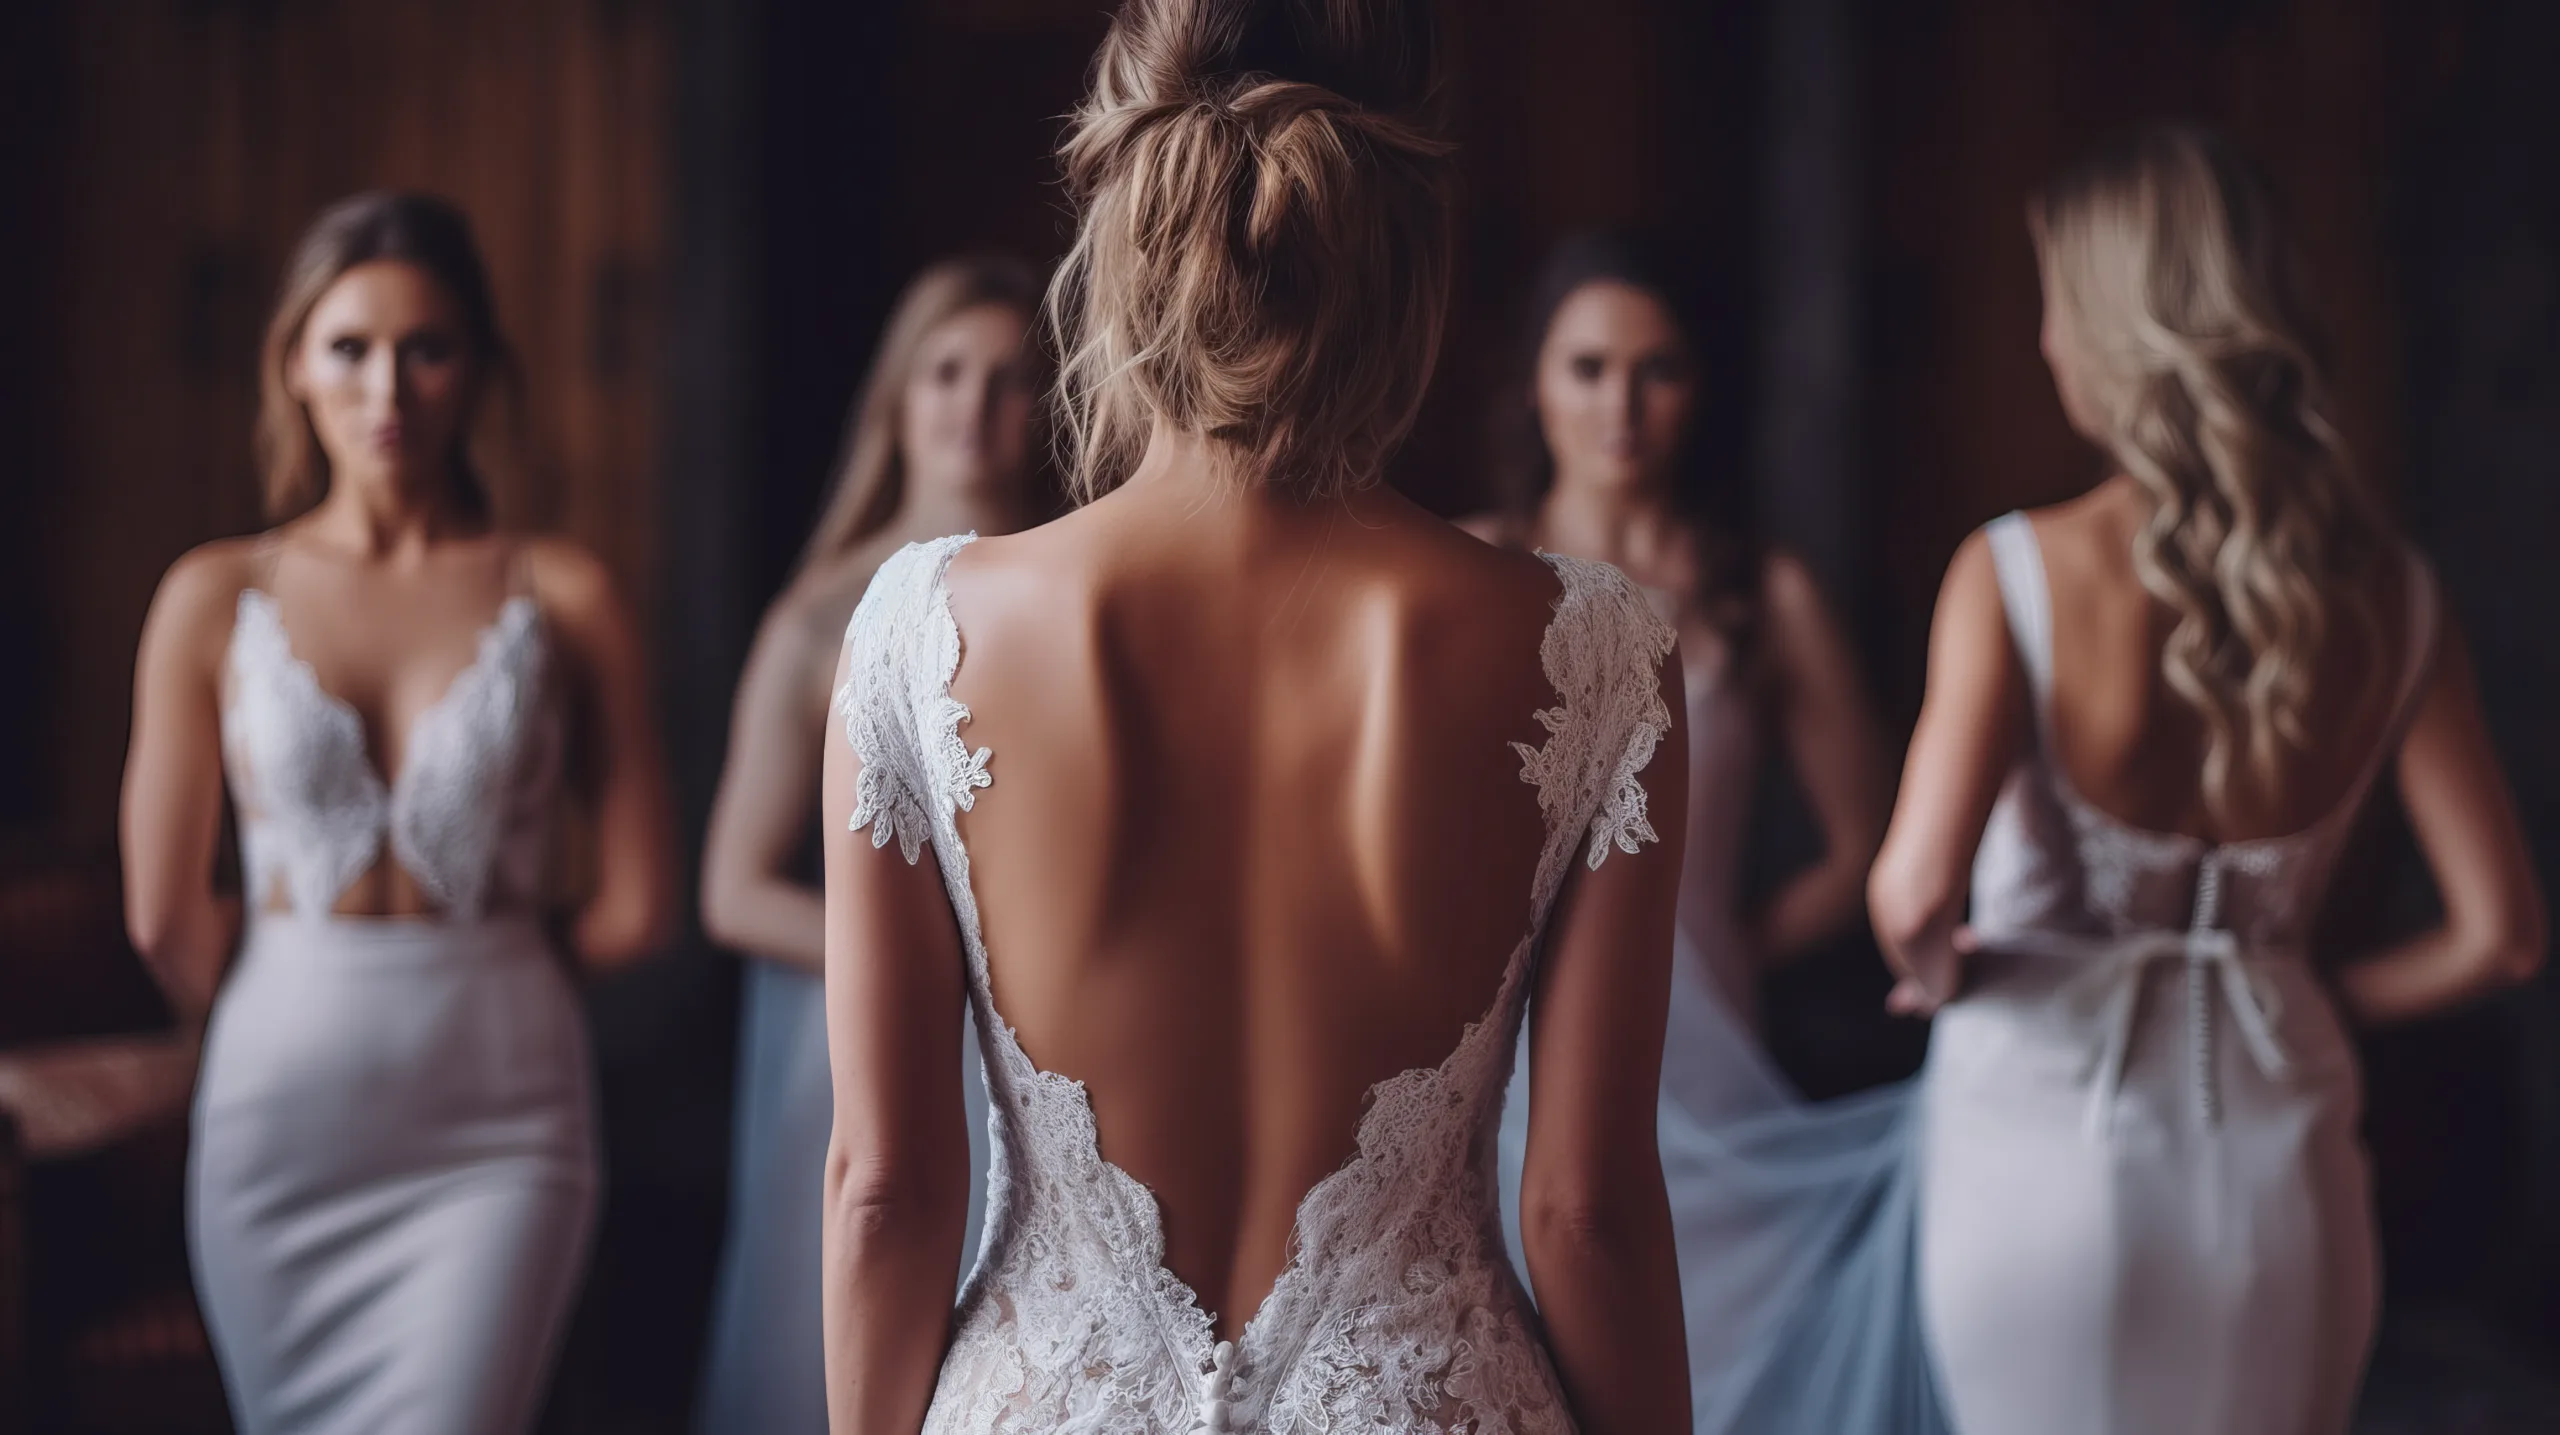 Skills of low light Photography: a woman in a wedding dress looking at her reflection in a mirror.